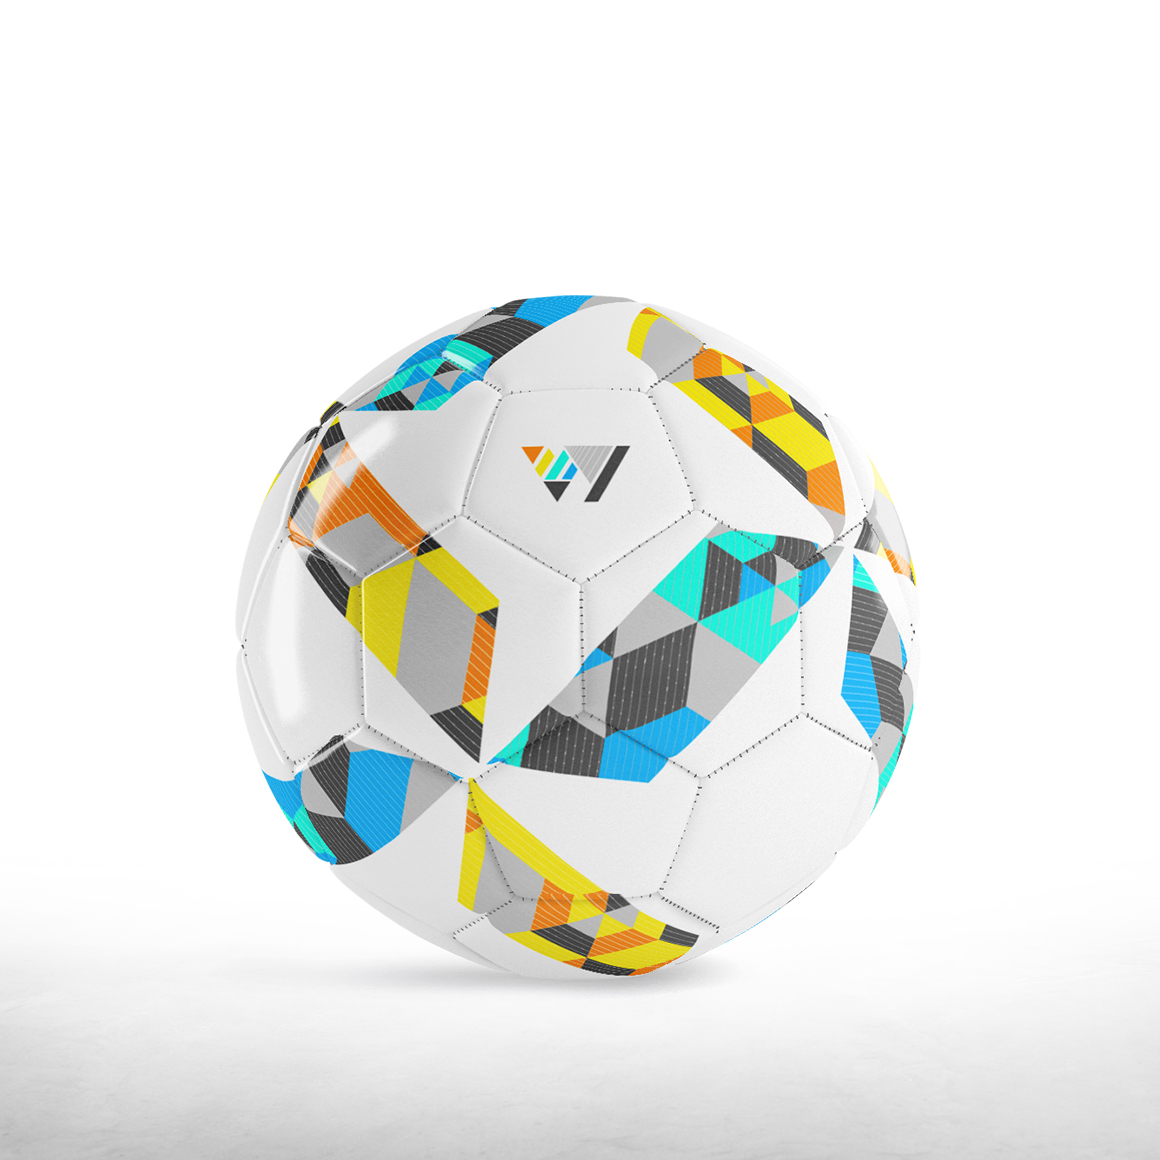 Download Free Soccer Ball Mockup : Soccer Ball Mockup in Object Mockups on Yellow Images ... : Download ...